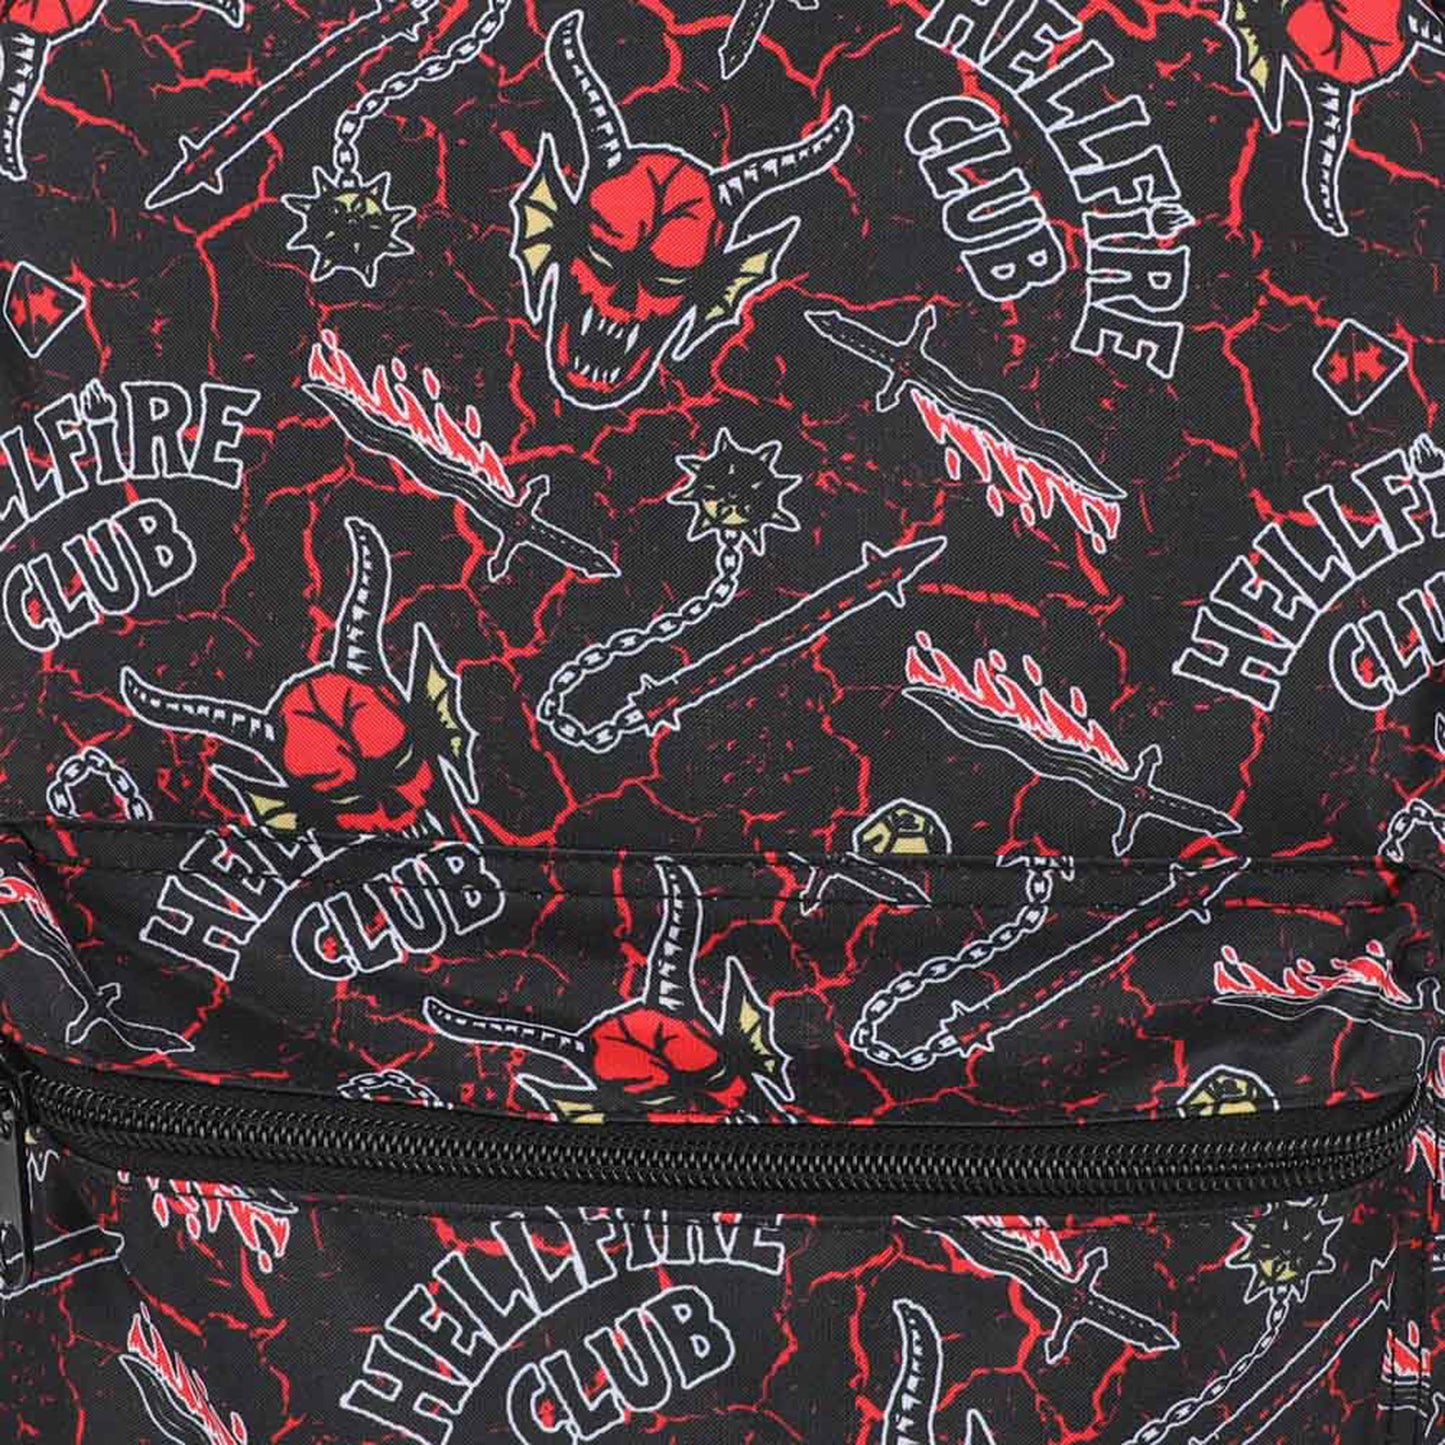 Load image into Gallery viewer, Hellfire Club (Stranger Things) AOP Laptop Backpack
